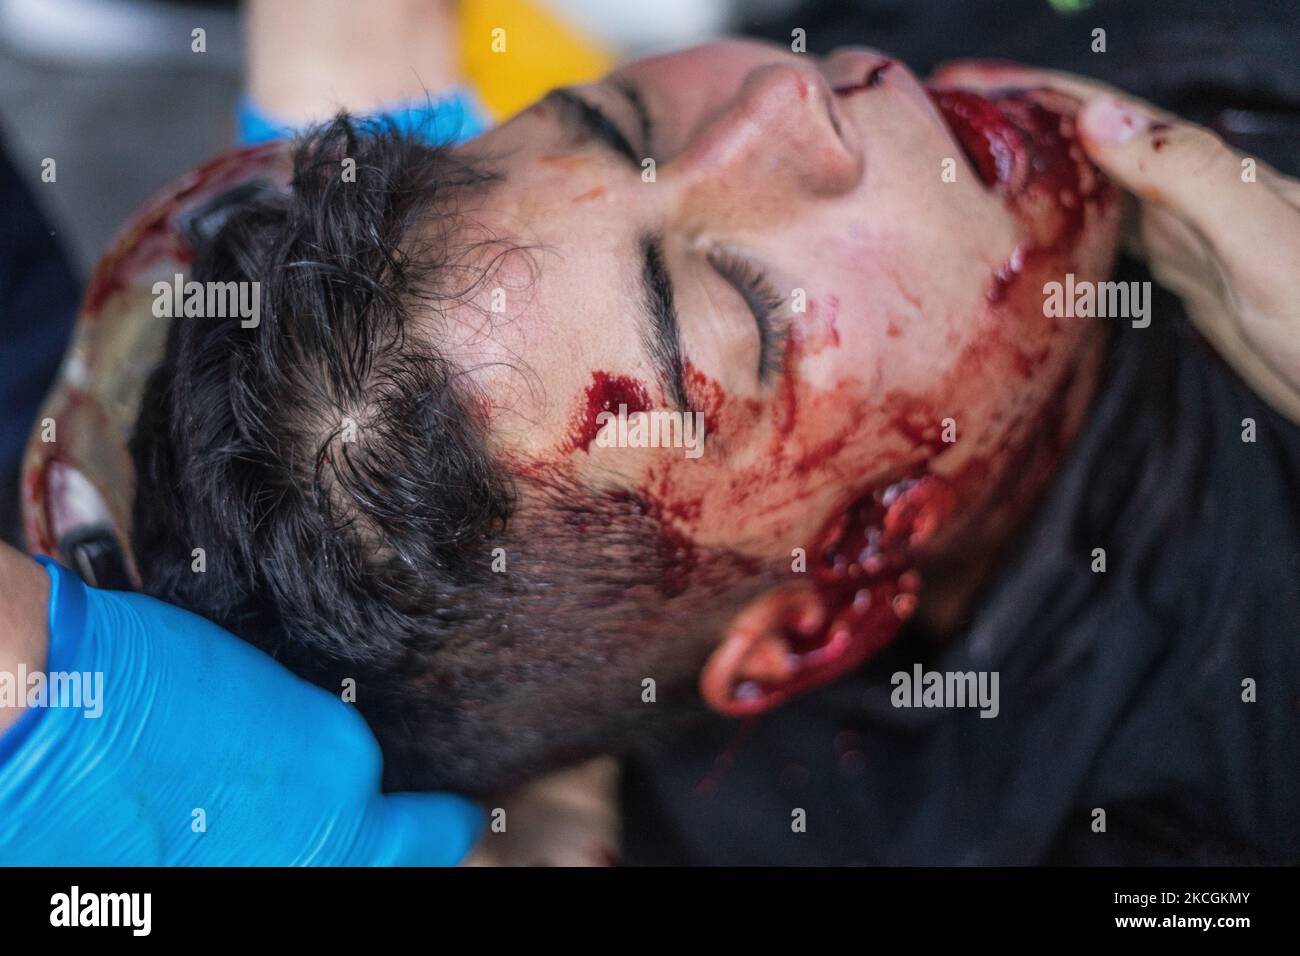 (EDITOR'S NOTE: Image depicts graphic content)A man injured during clashes with riot police is assisted by paramedics during a protest against the government in Medellin, Colombia, on June 28, 2021. Some people injured by police shoots with no letal guns. (Photo by Santiago Botero/NurPhoto) Stock Photo